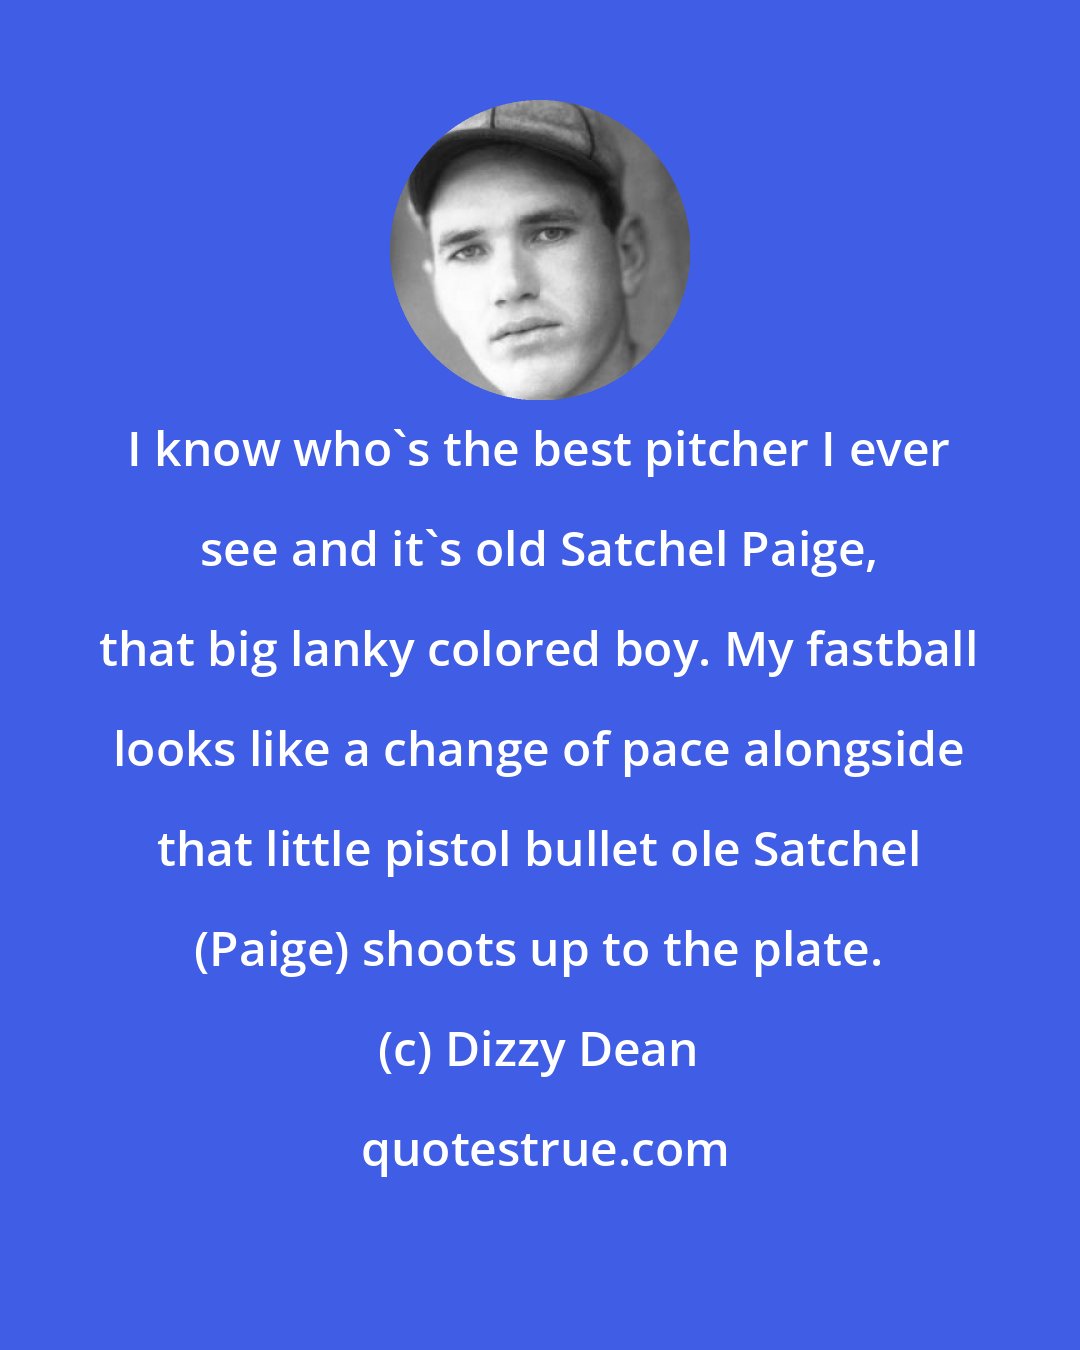 Dizzy Dean: I know who's the best pitcher I ever see and it's old Satchel Paige, that big lanky colored boy. My fastball looks like a change of pace alongside that little pistol bullet ole Satchel (Paige) shoots up to the plate.